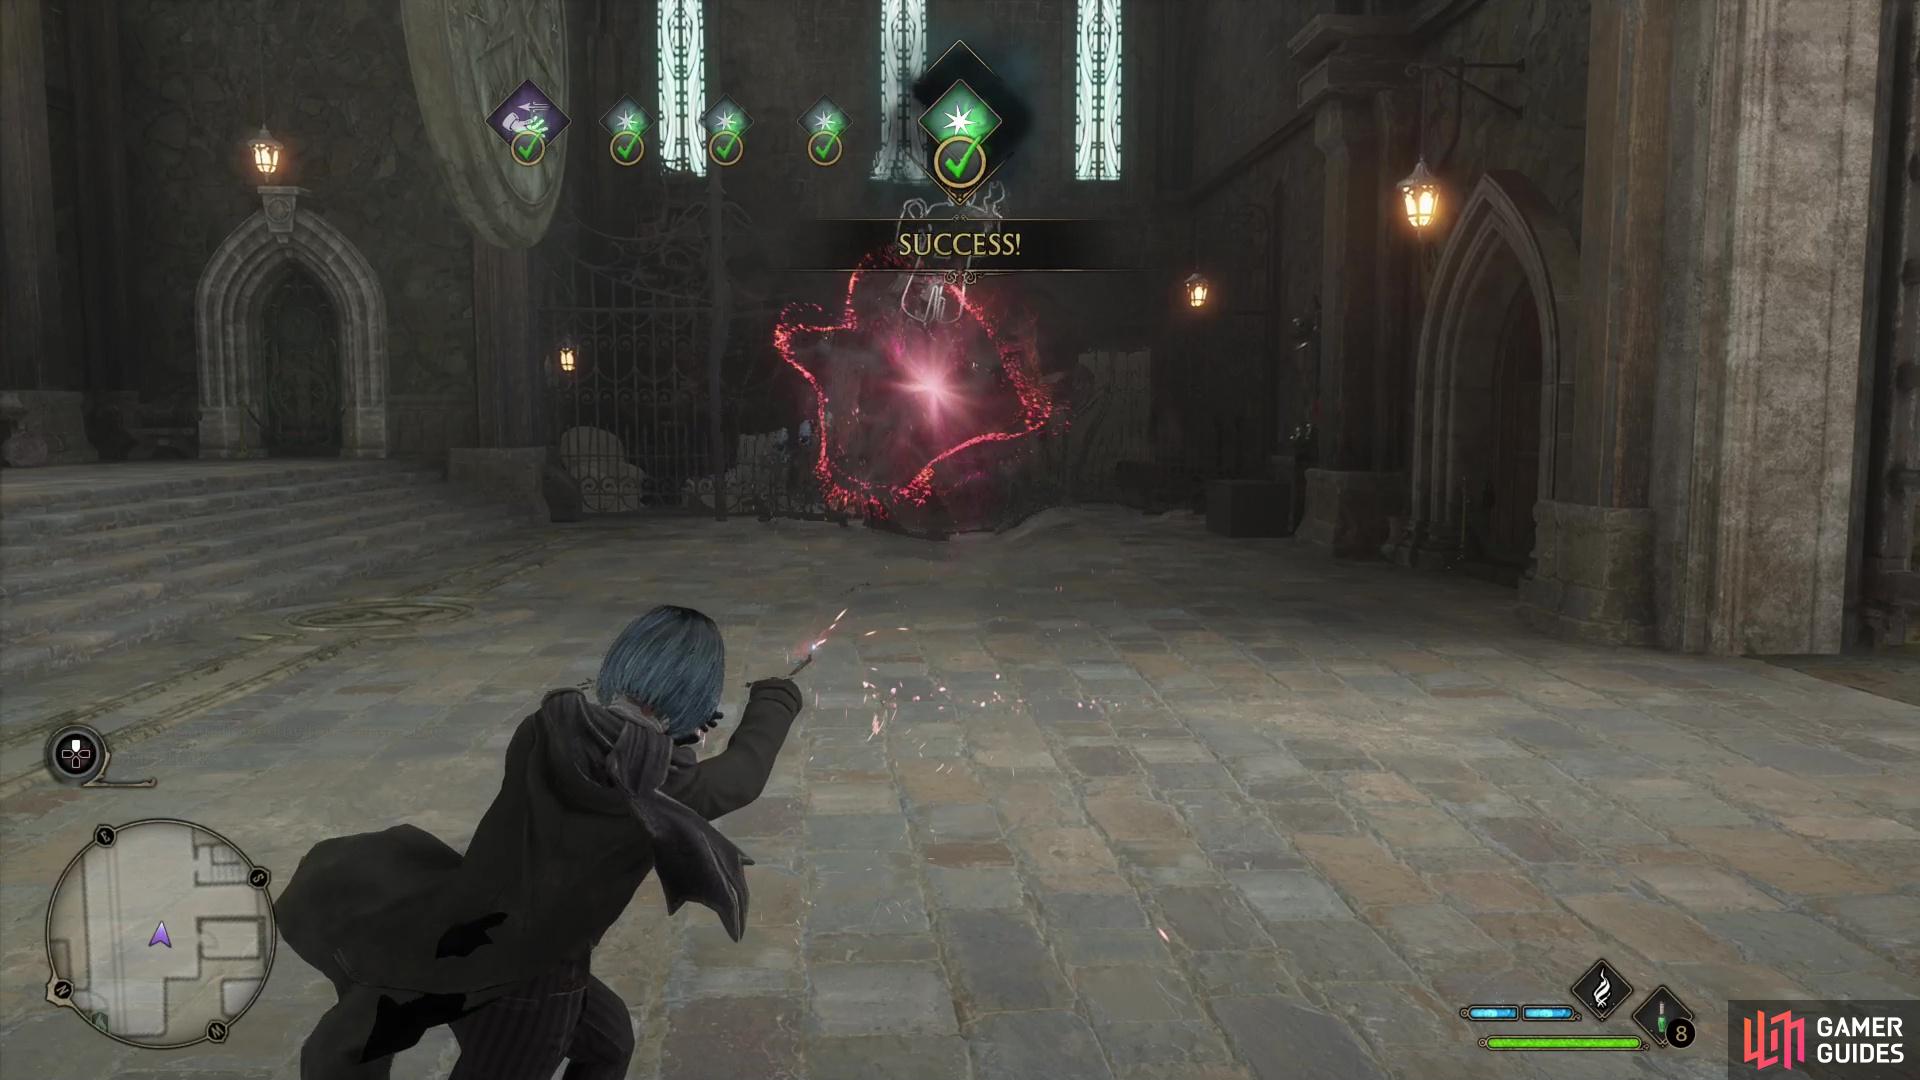 Perform a combo of Accio followed by four normal wand attacks.